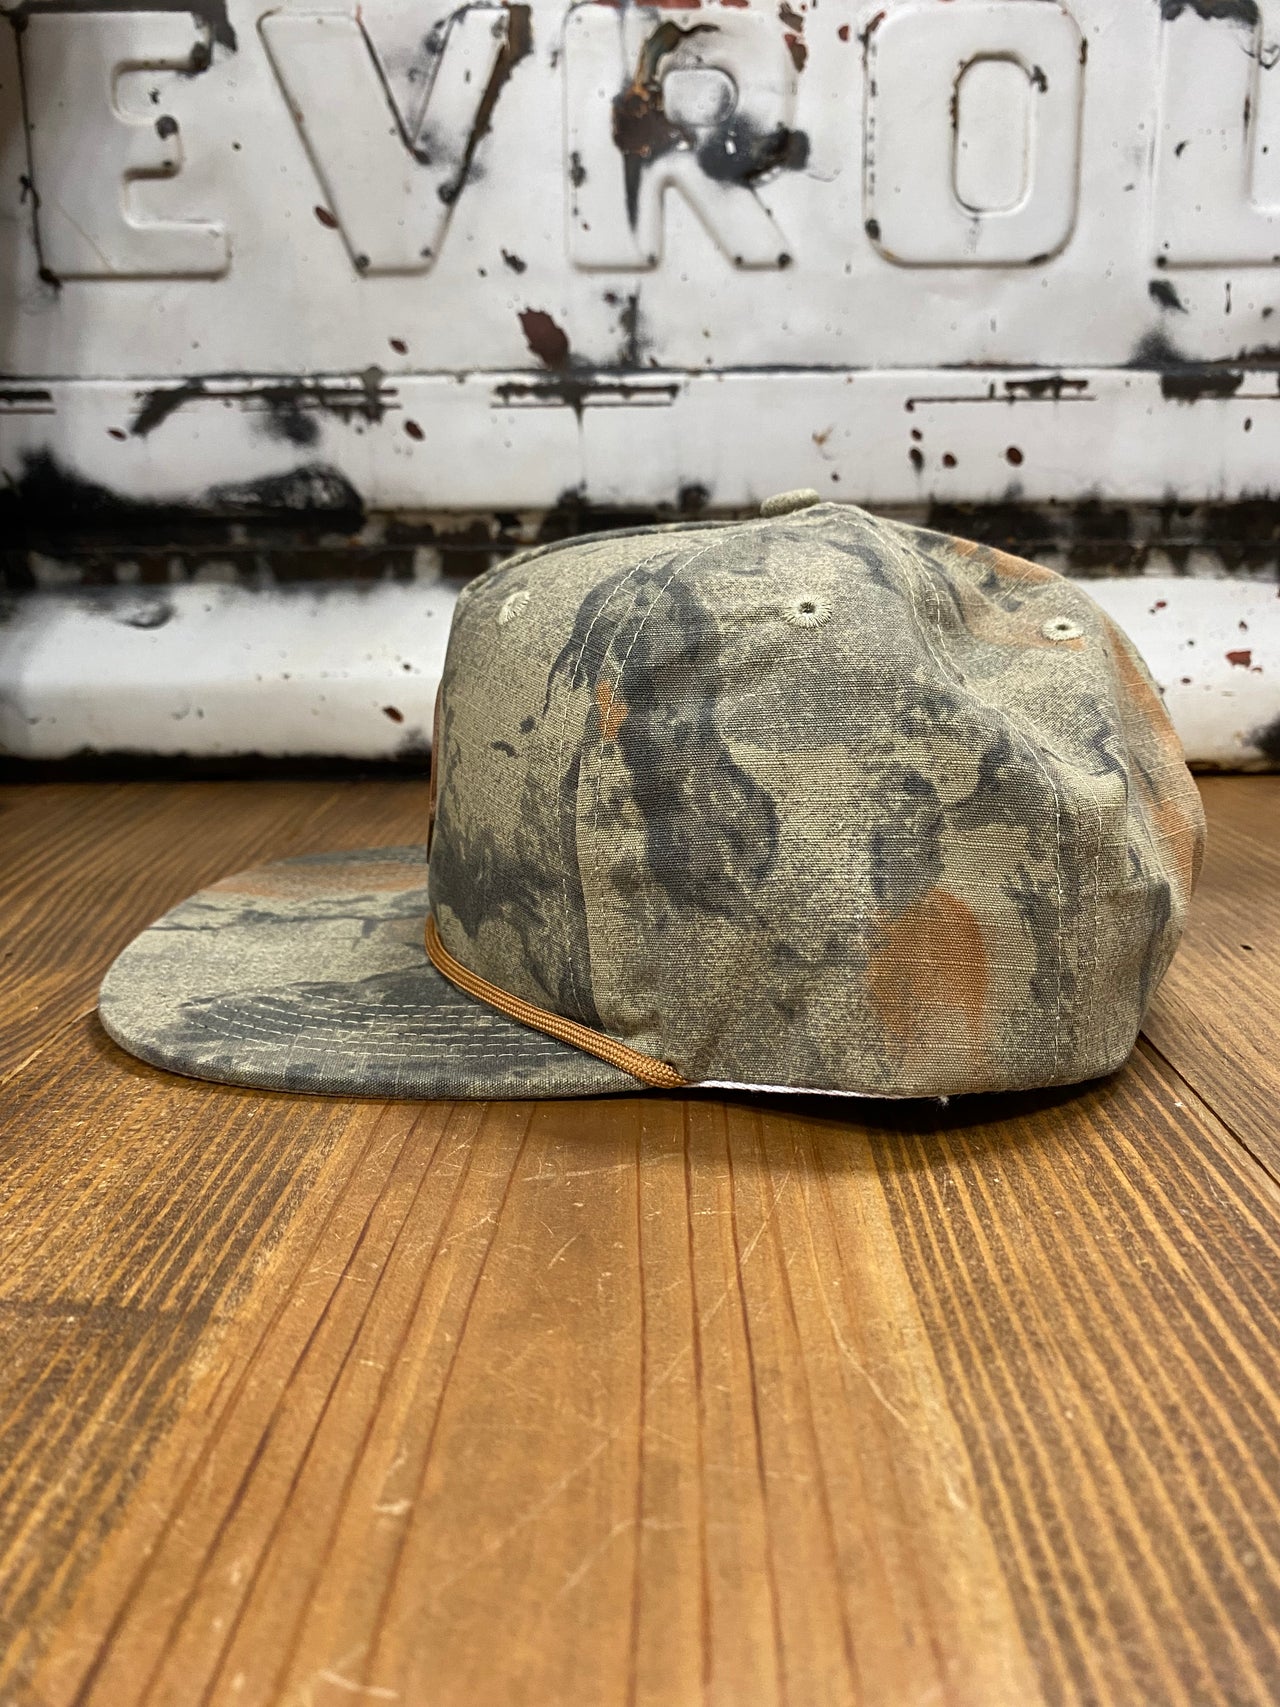 "Speckle Bellies Circle Logo Leather Patch Natural Camo Rope Cap - High-quality mesh and 100% polyester construction for comfort and durability. Features a distinctive leather patch with a circle logo, complemented by a natural camo pattern. Mid crown design, adjustable fit, and rugged rope detailing for an adventurous, outdoor-inspired look."